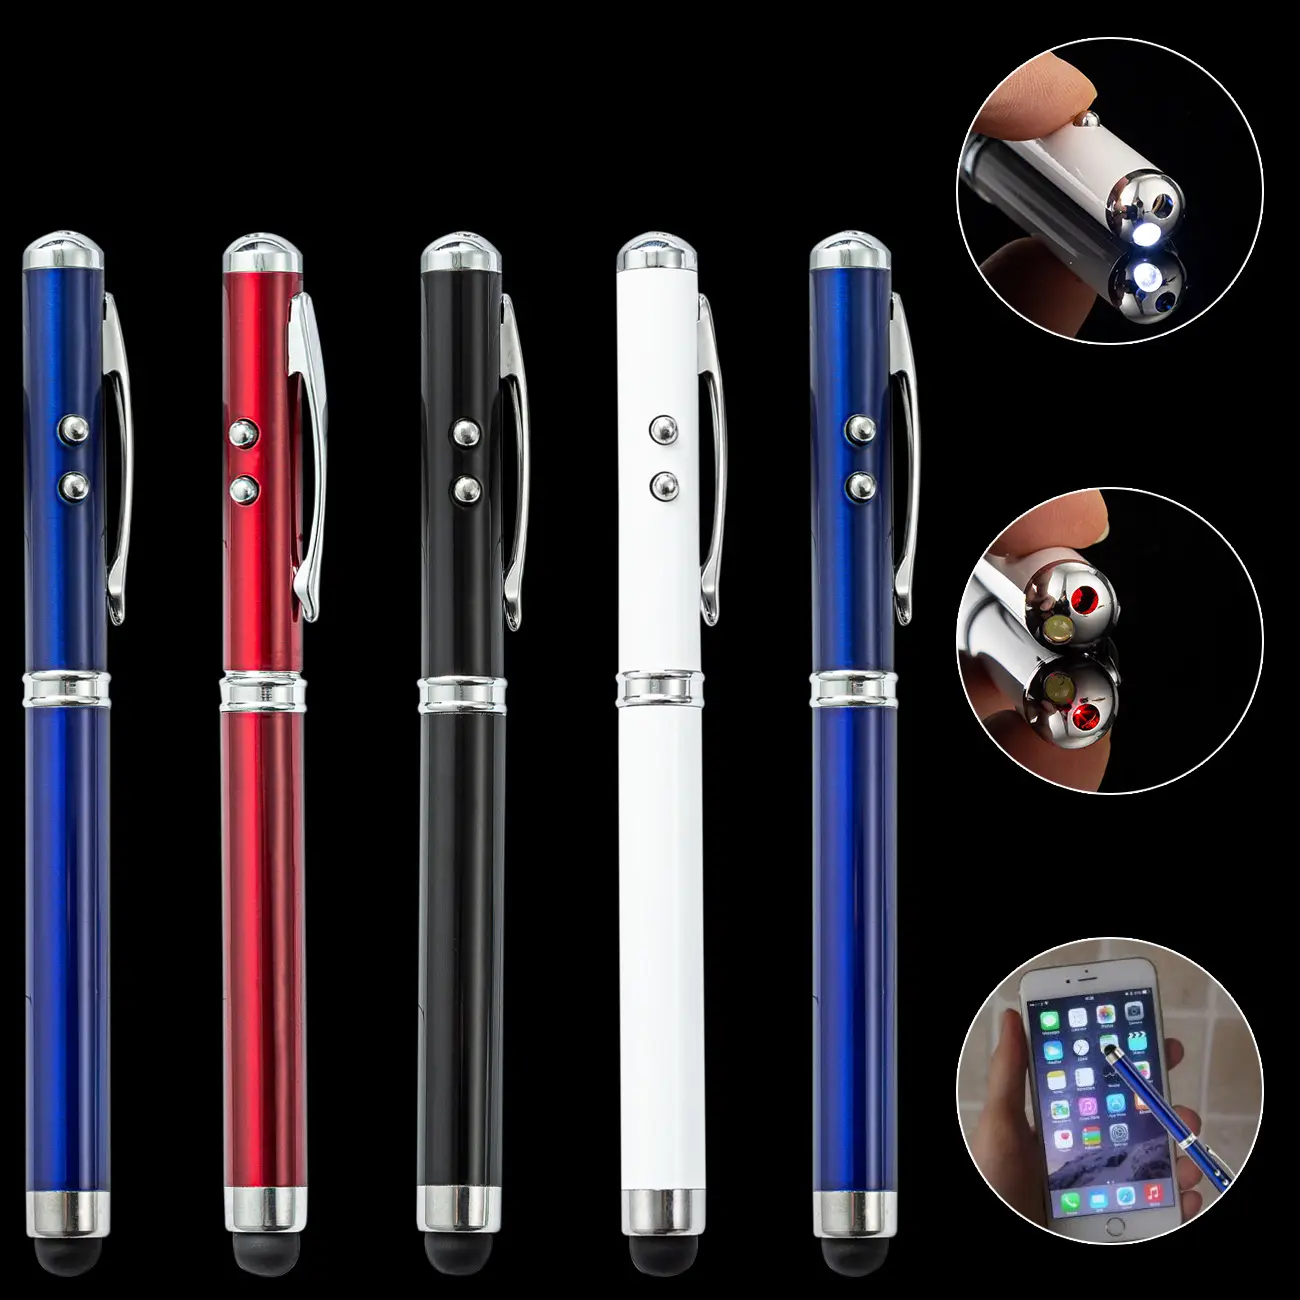 4 In 1 Screen Touch Stylus LED Light Solid Metal Pen Powerful Laser Pointer Pen Torch For Mobile Phone